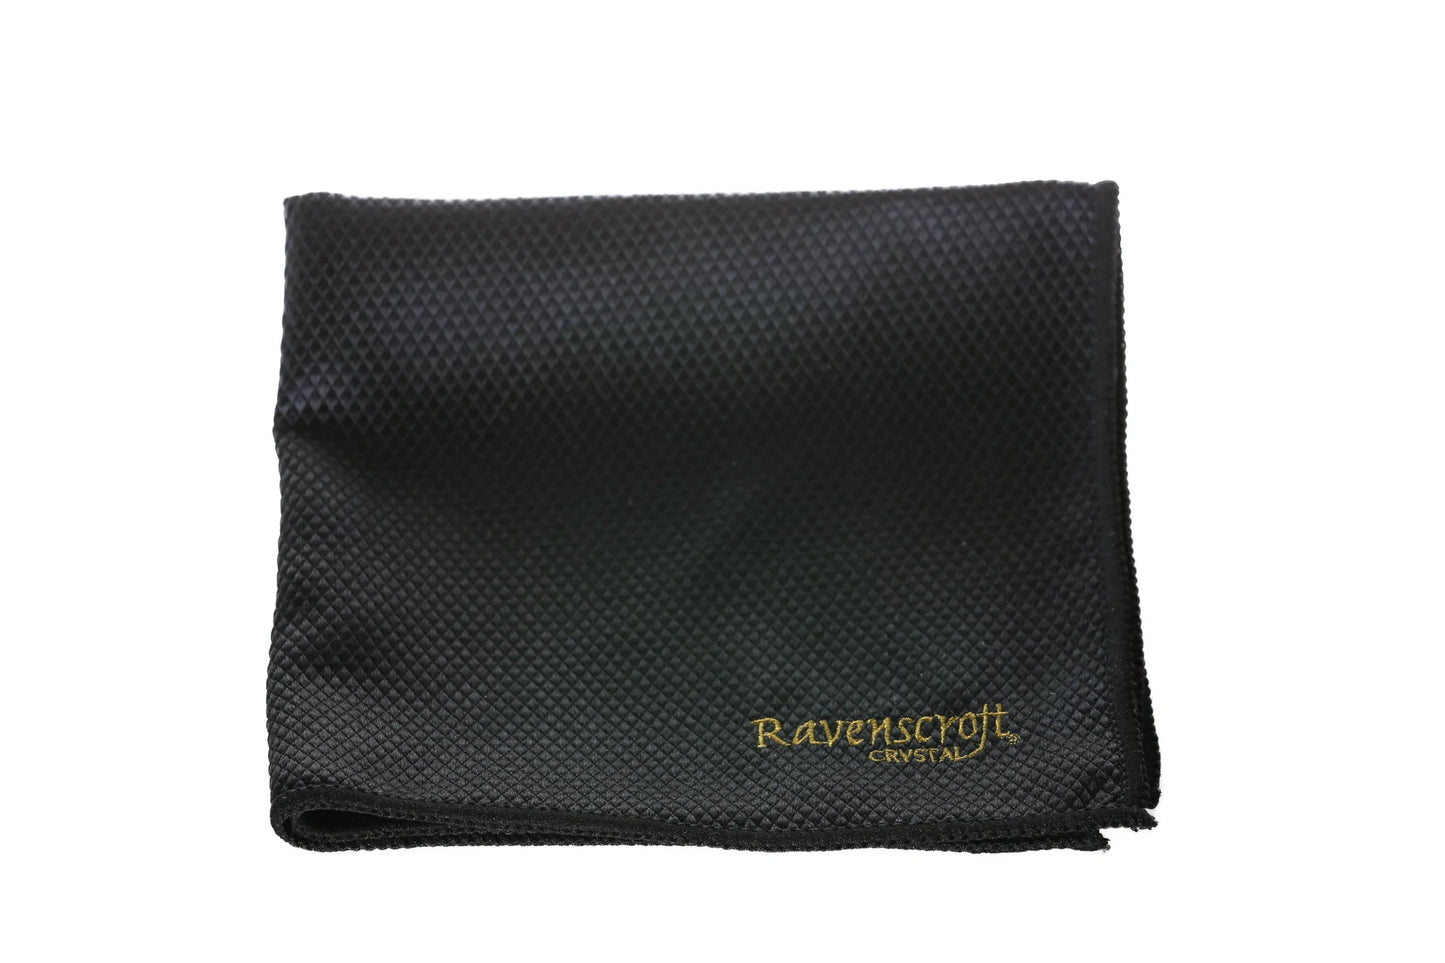 Ravenscroft Ultimate Wine Carrying Bag with Free Microfiber Cleaning Cloth W0113